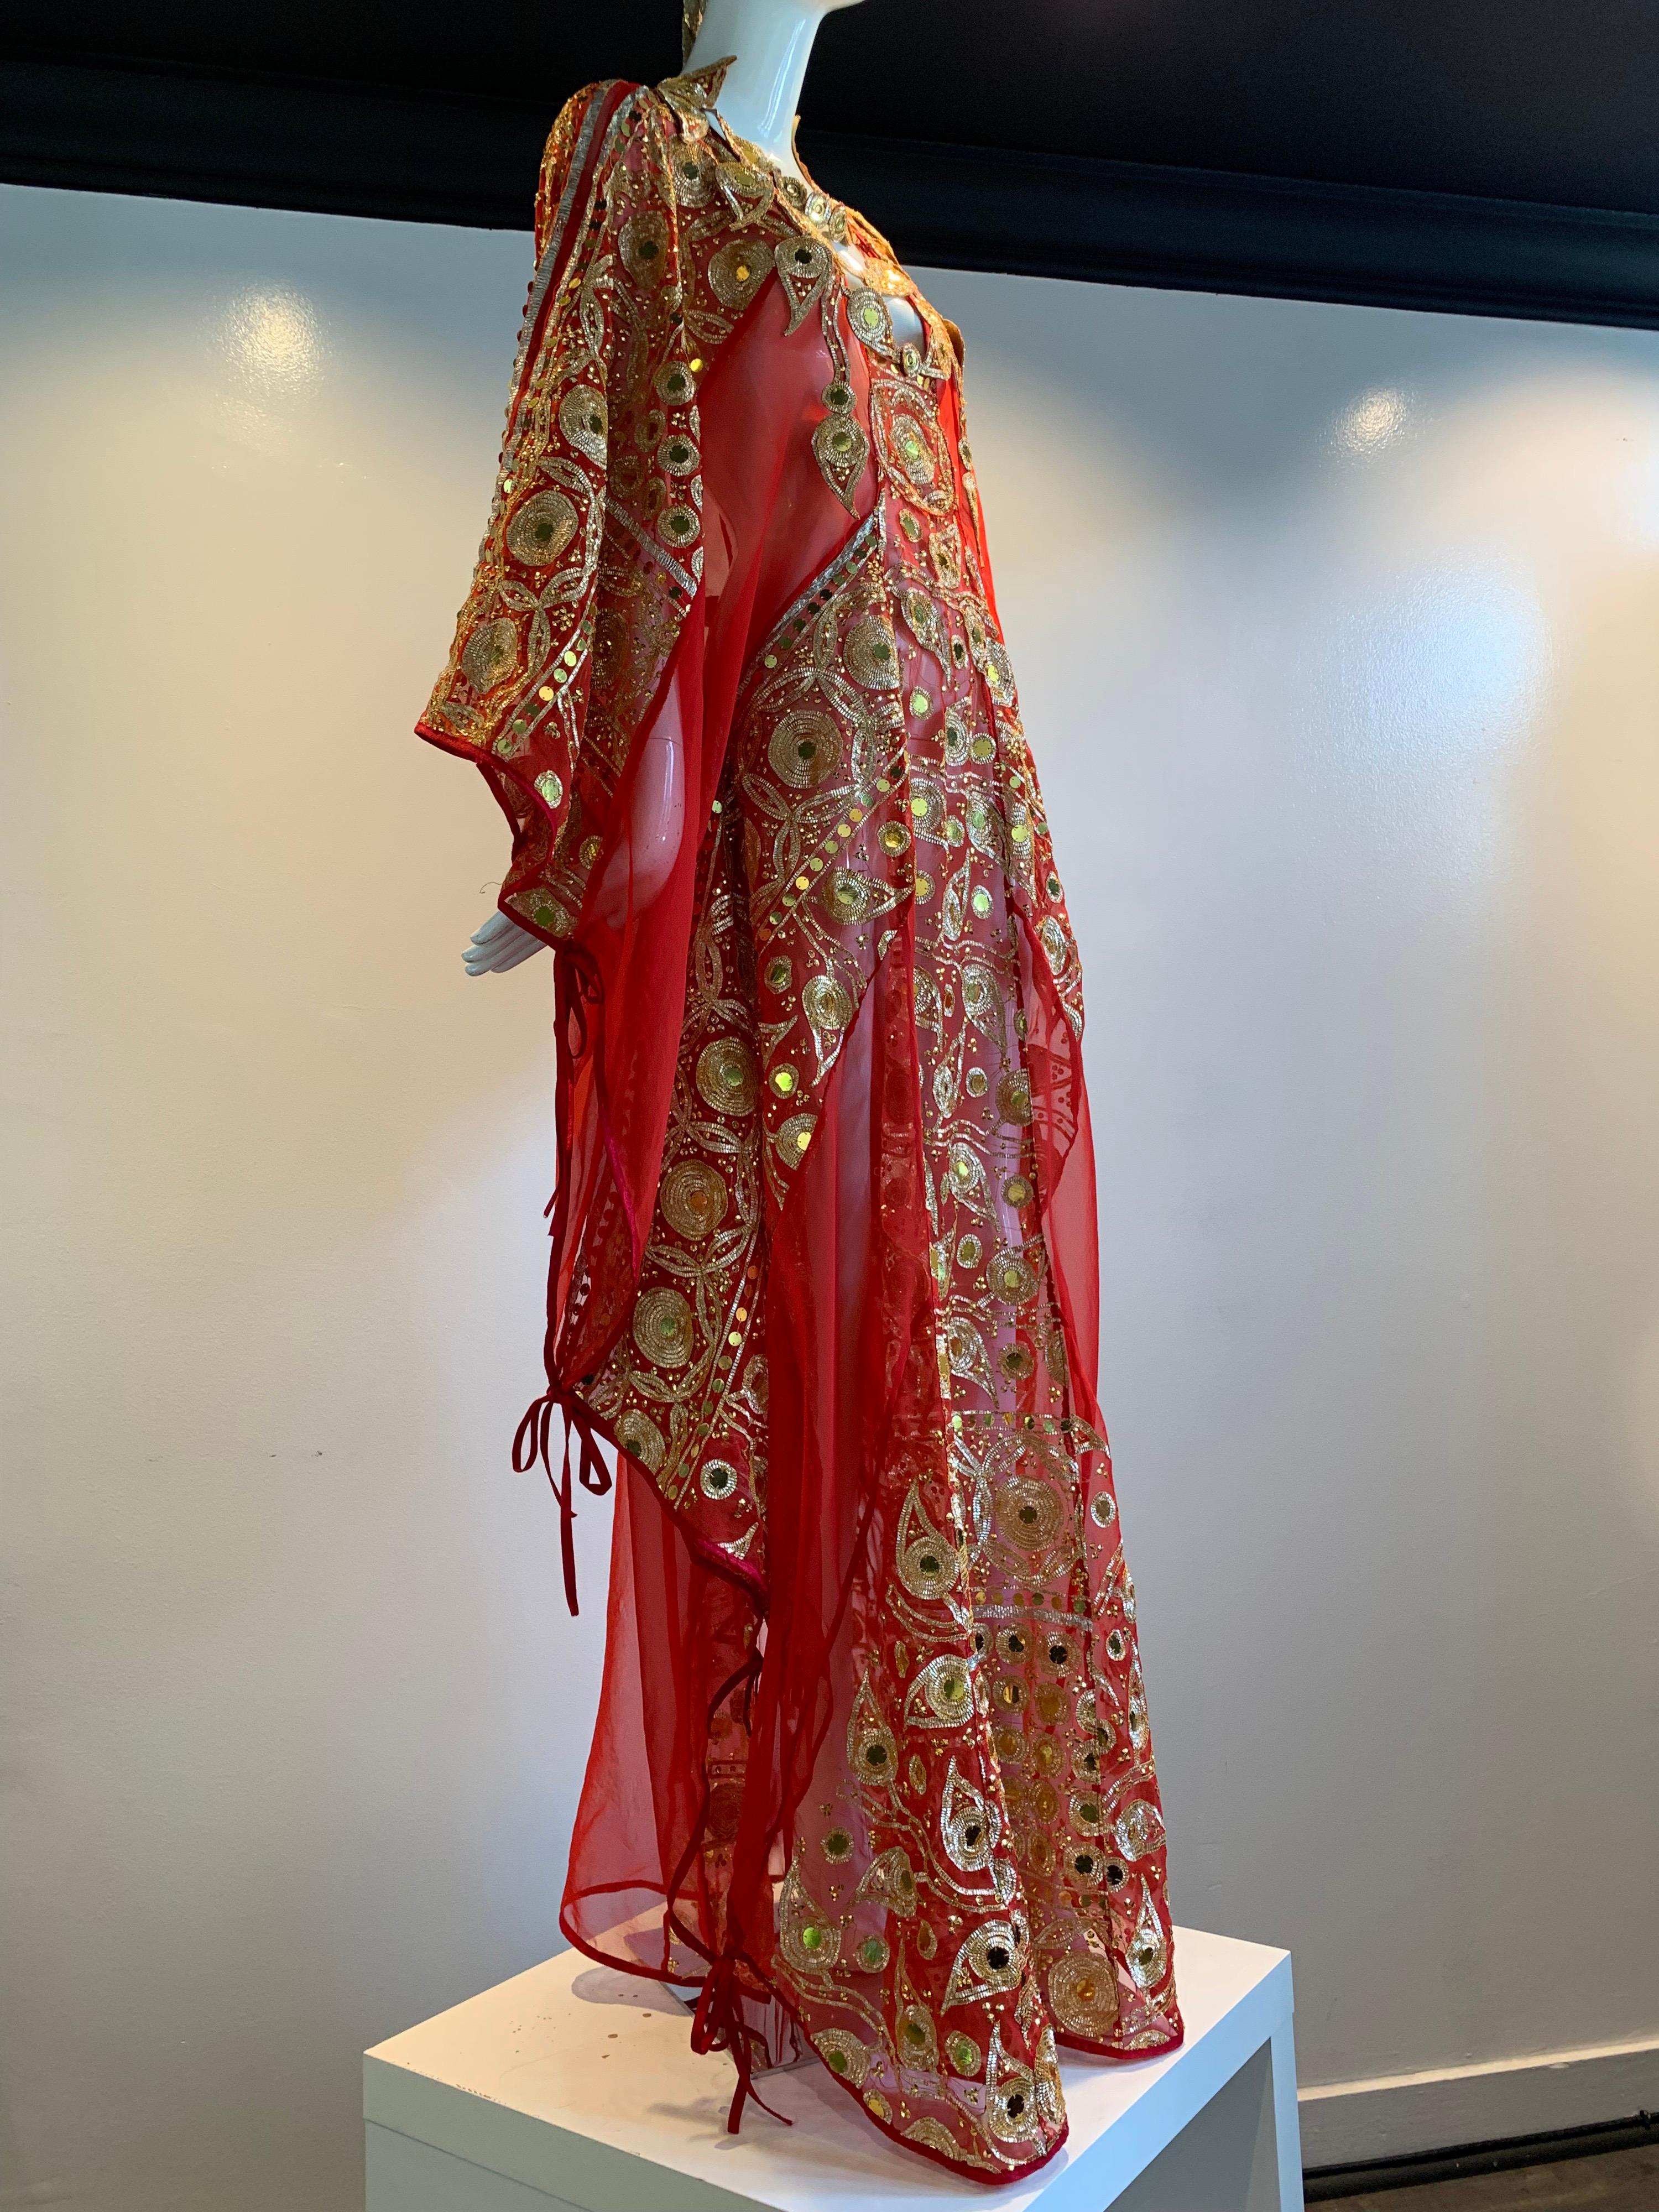 Torso Creations Red Silk Chiffon Caftan Heavily Embroidered W/ Gold & Sequins. One of a kind and uniquely fashioned from vintage red silk chiffon sari fabric in the style of Thea Porter. Fabric ties together at sides to give adjustibility in size